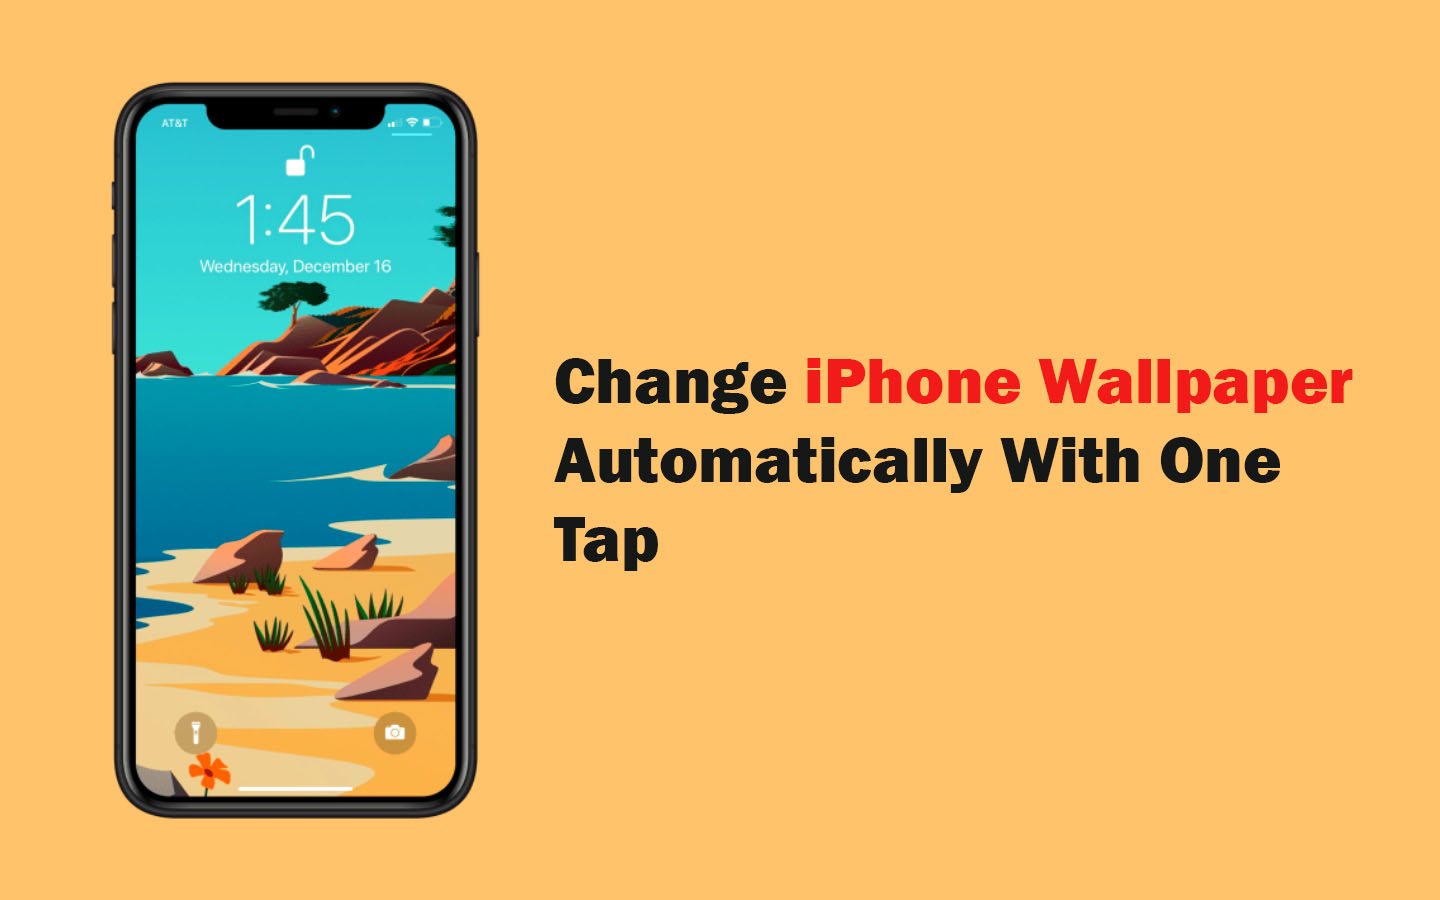 Change iPhone Wallpaper Automatically With One Tap